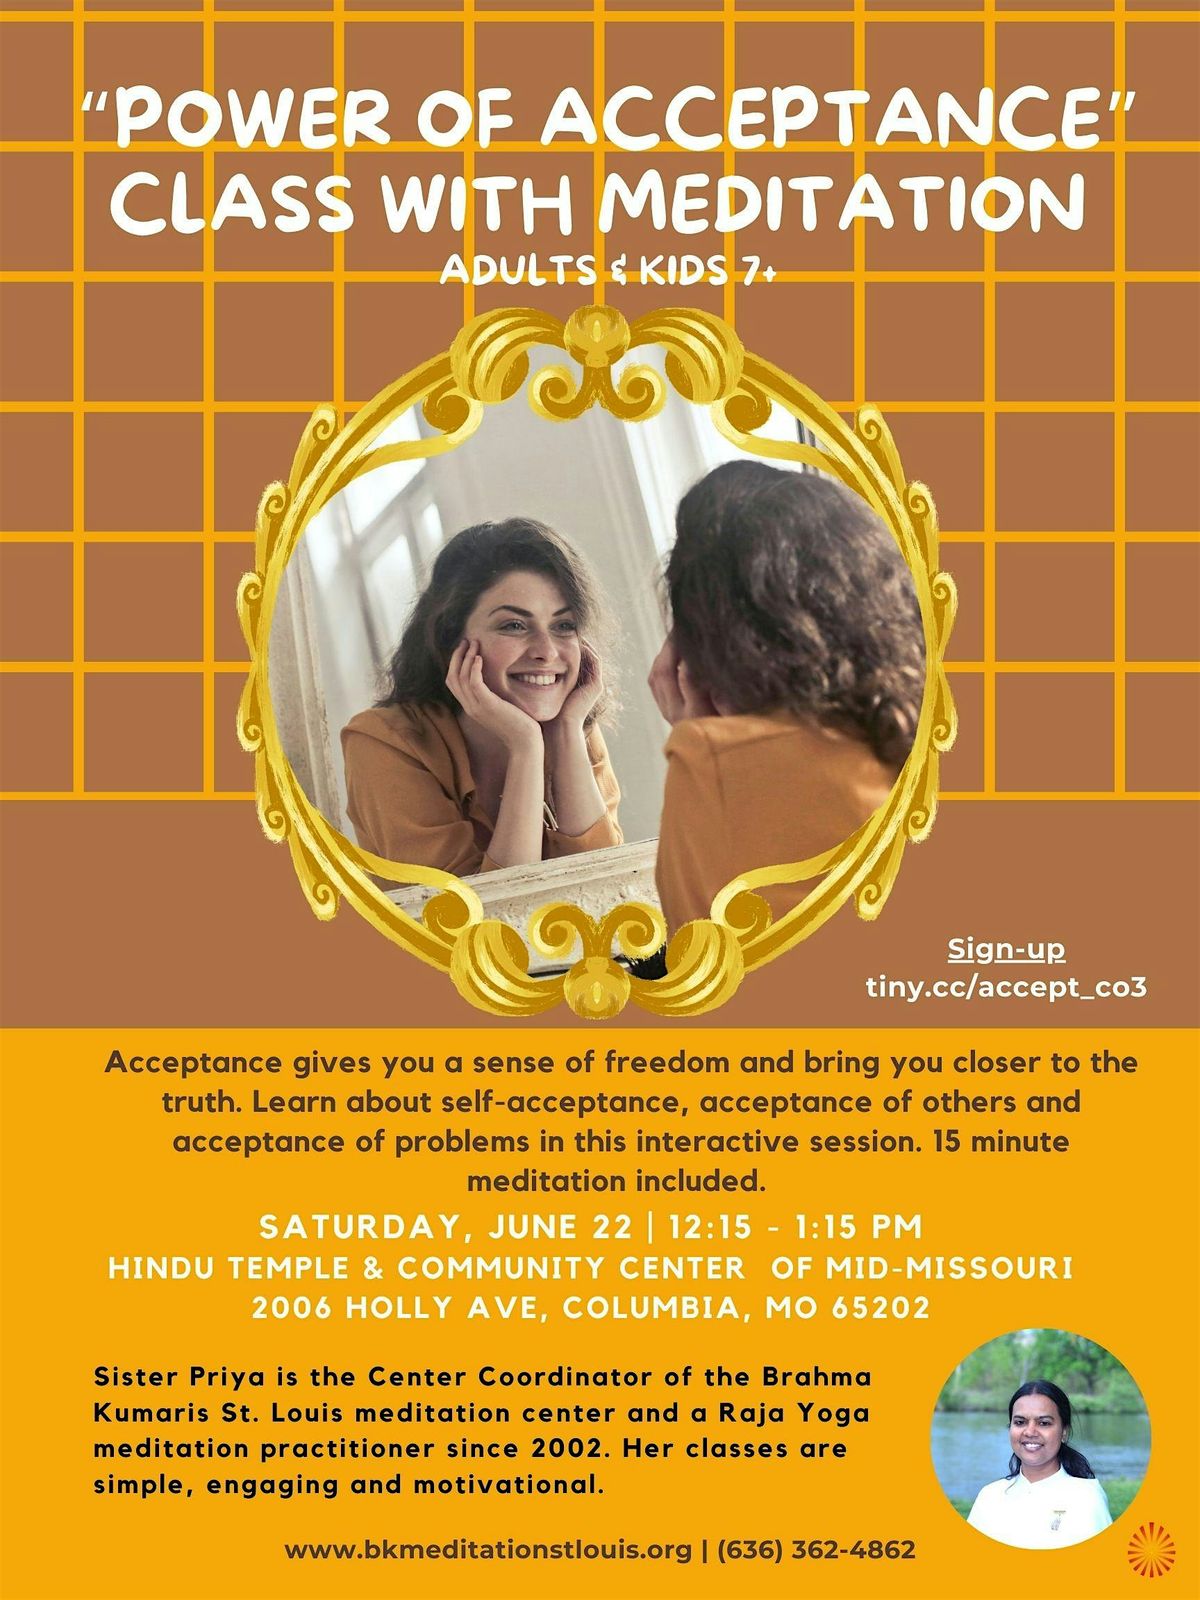 Columbia, MO - Power of Acceptance Class with Meditation